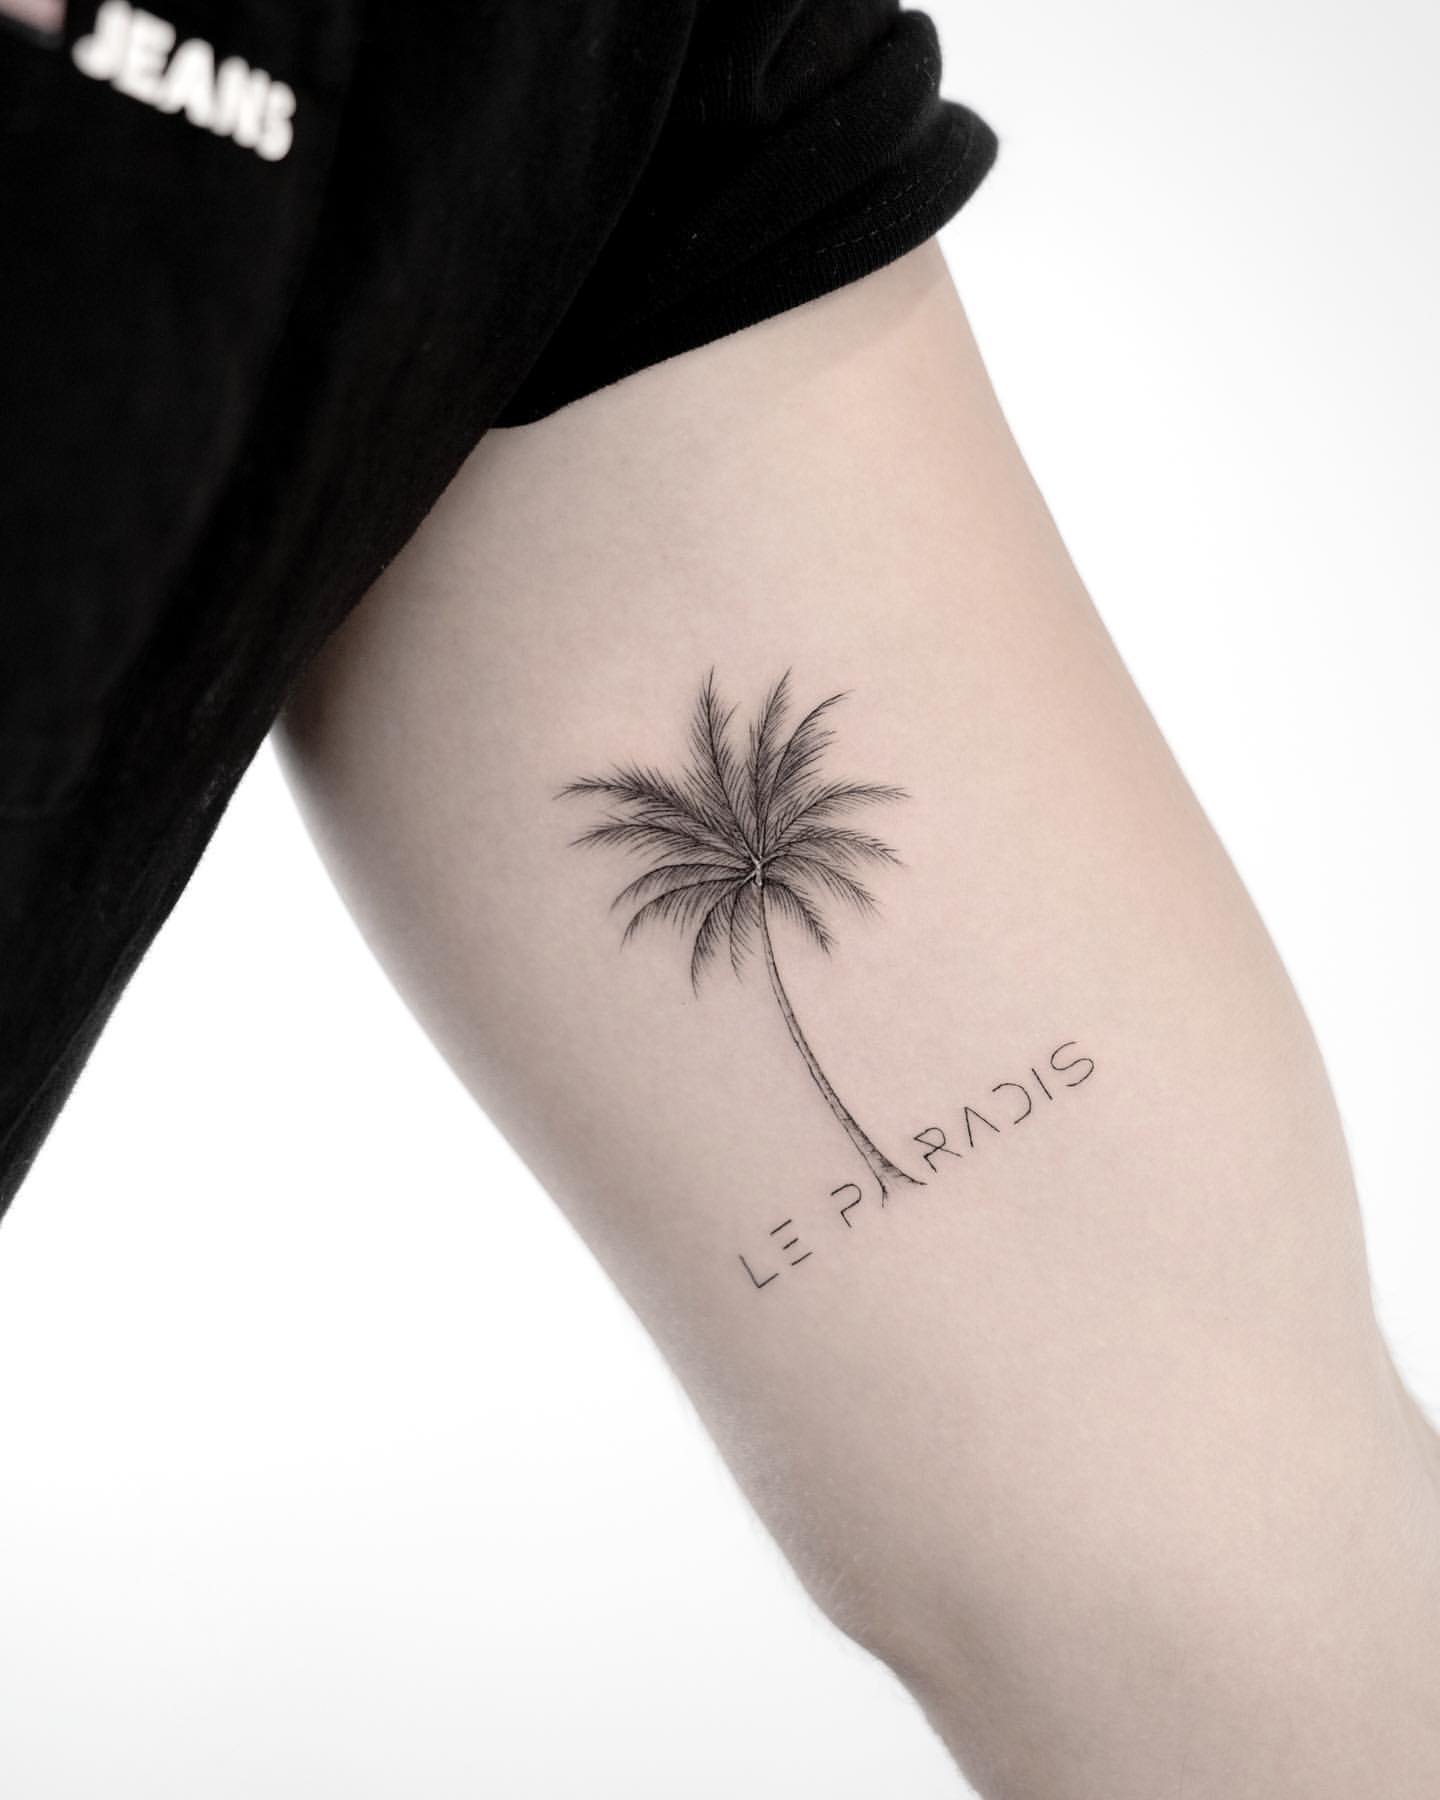 ALL DAY Tattoo BKK - Minimalist palm tree joint by the homie Jong | Facebook